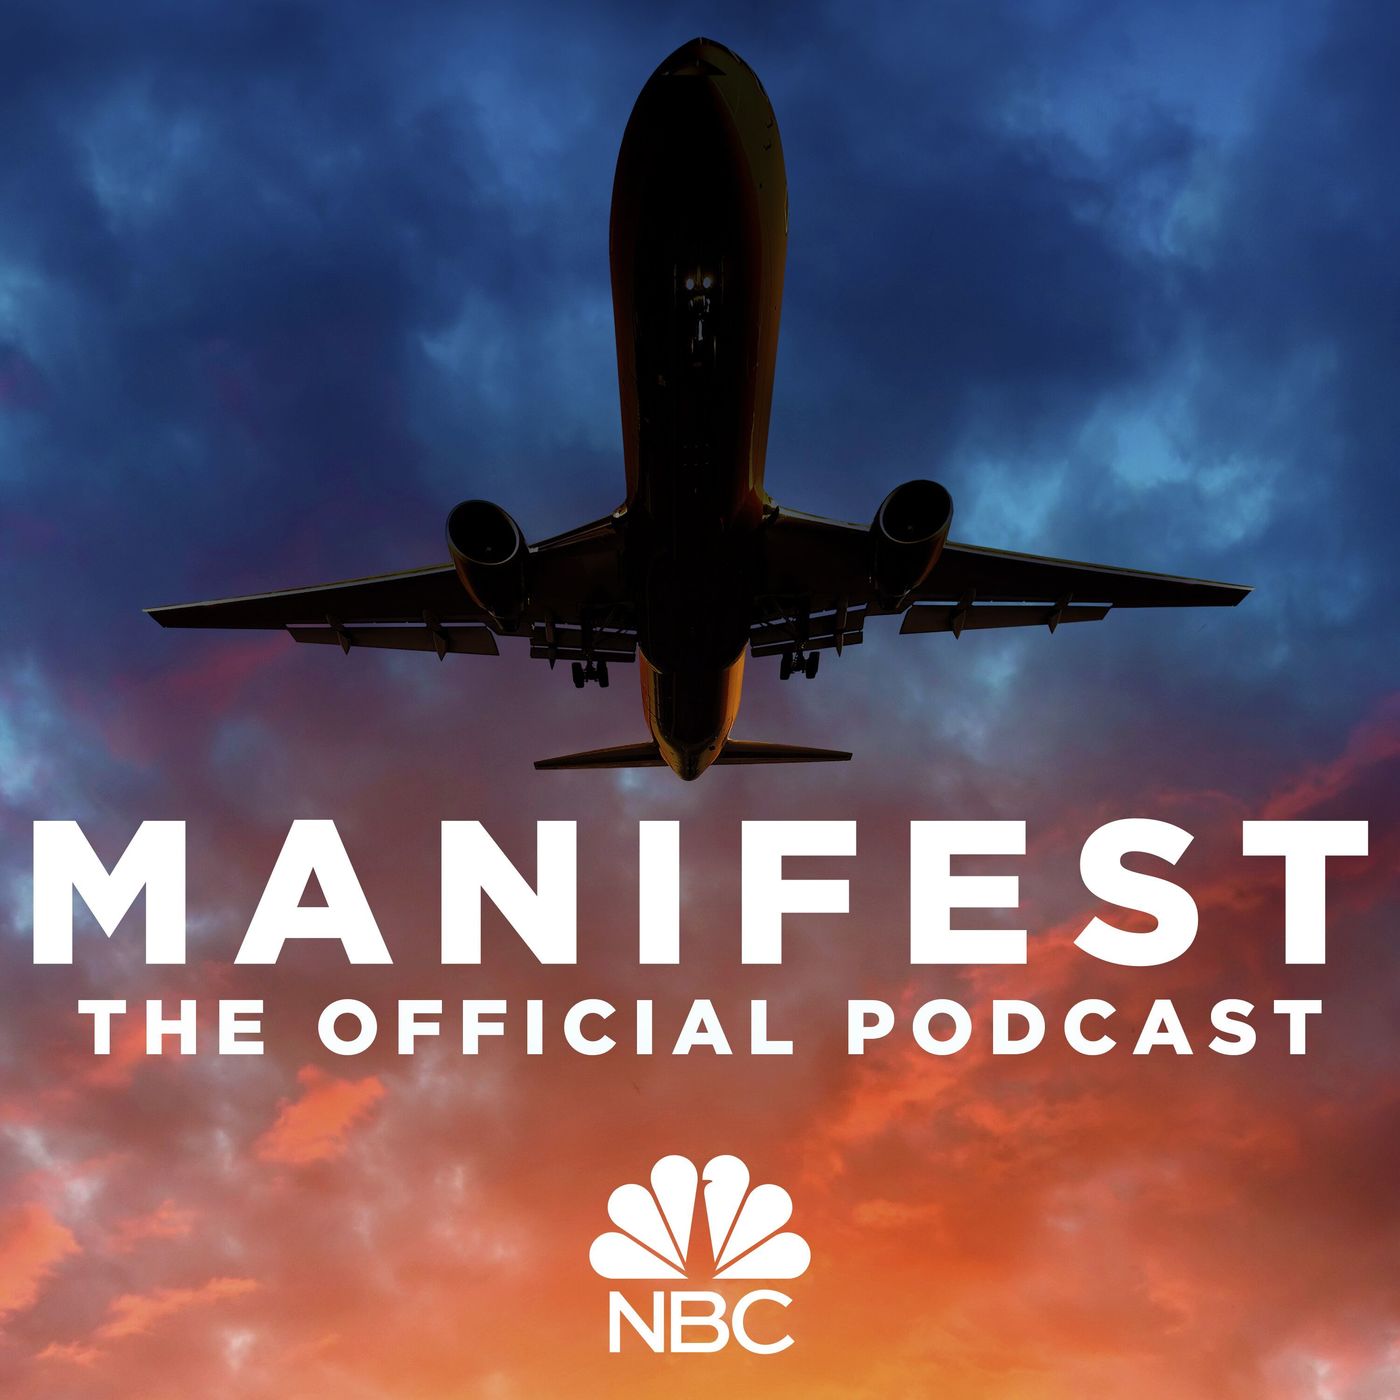 manifest what happened to the plane